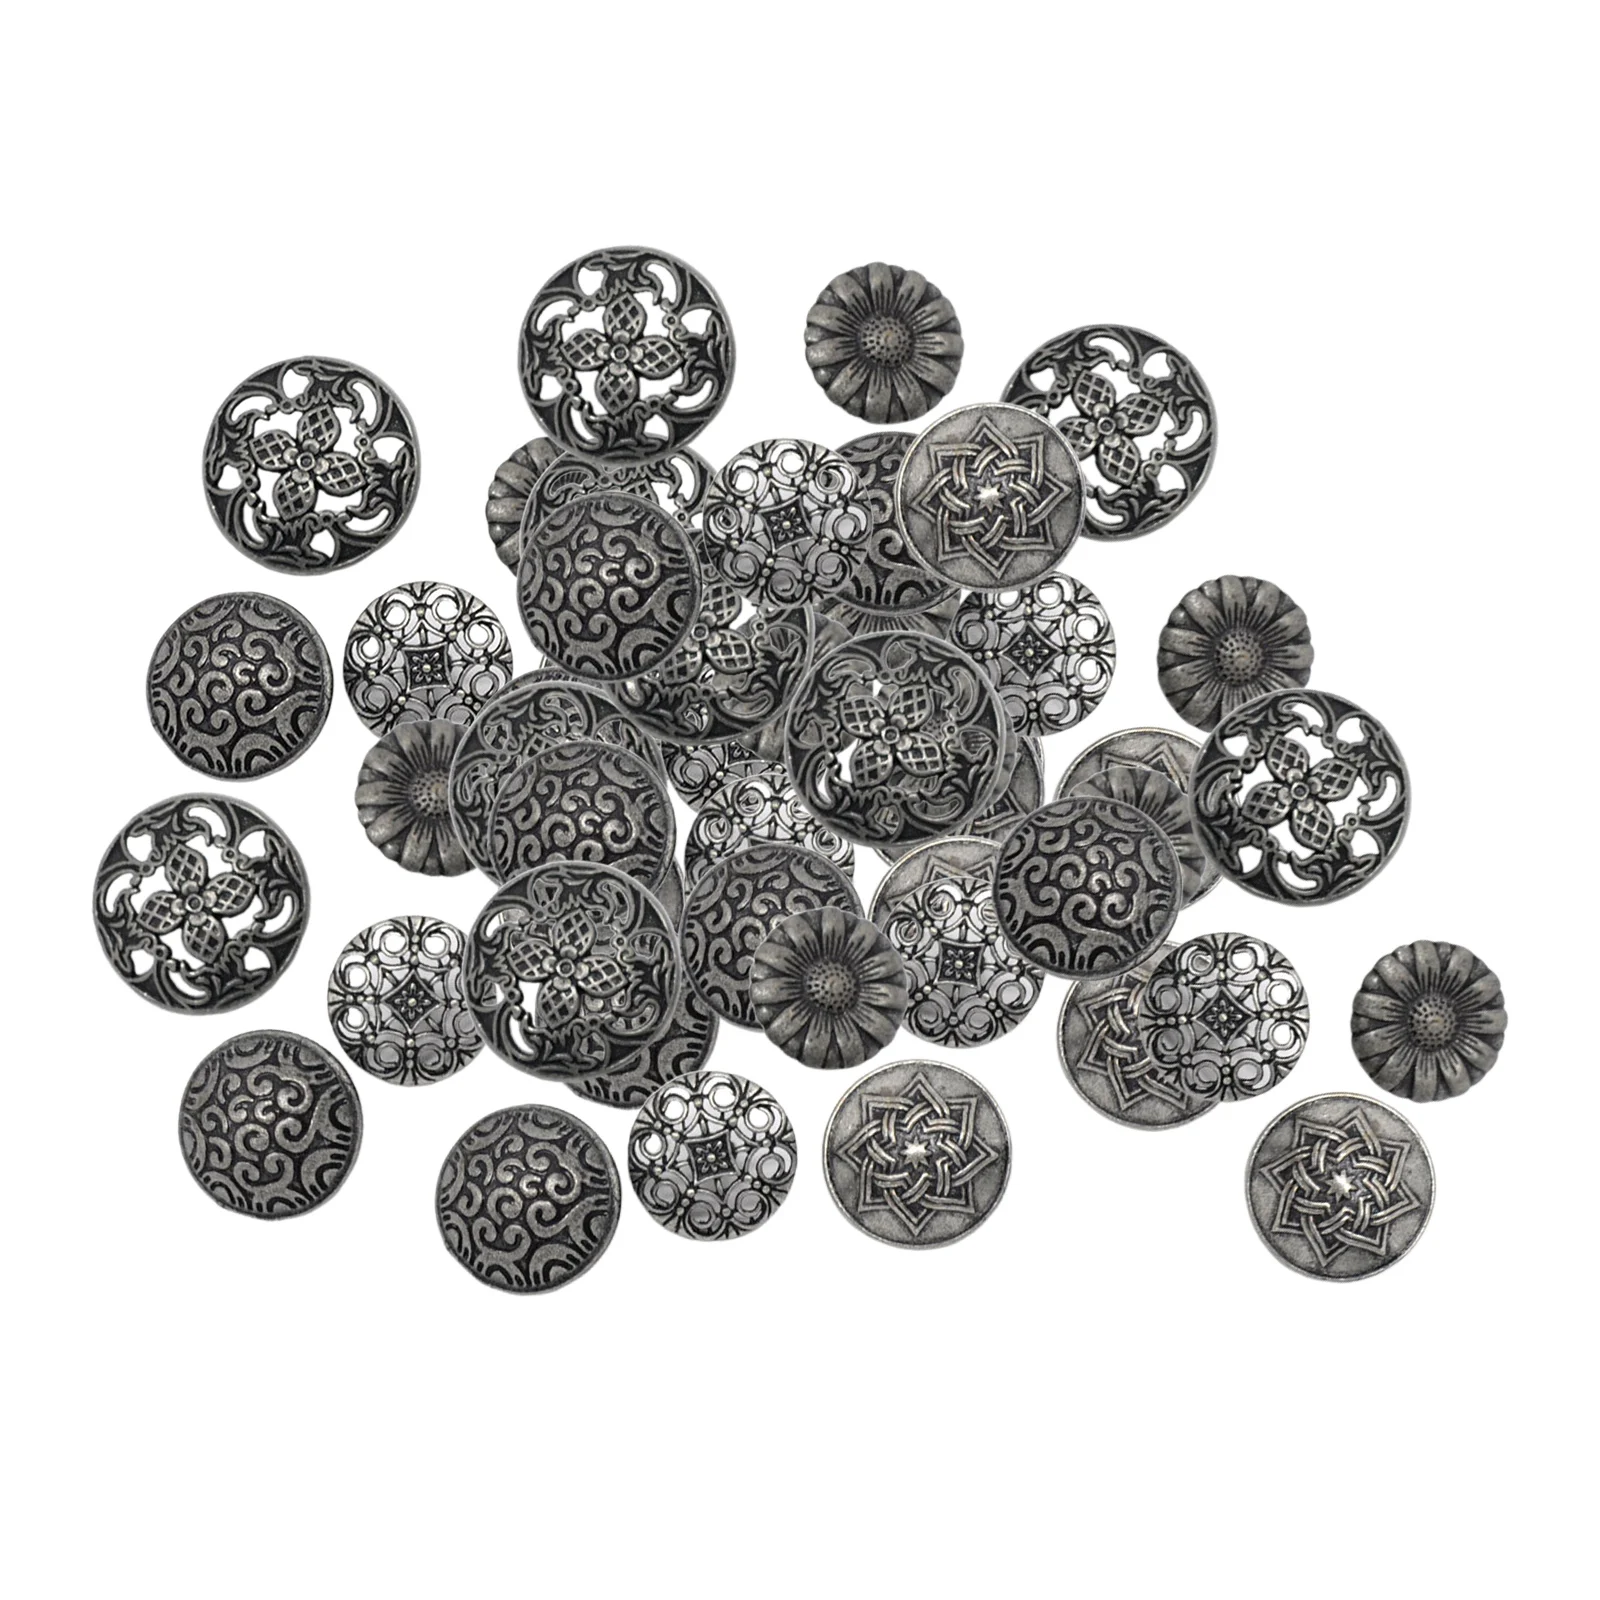 50 Pieces Round Mixed Antique Silver Vintage Metal Buttons Flower Decorative for DIY Crafts Sewing Crochet Decor Knitting